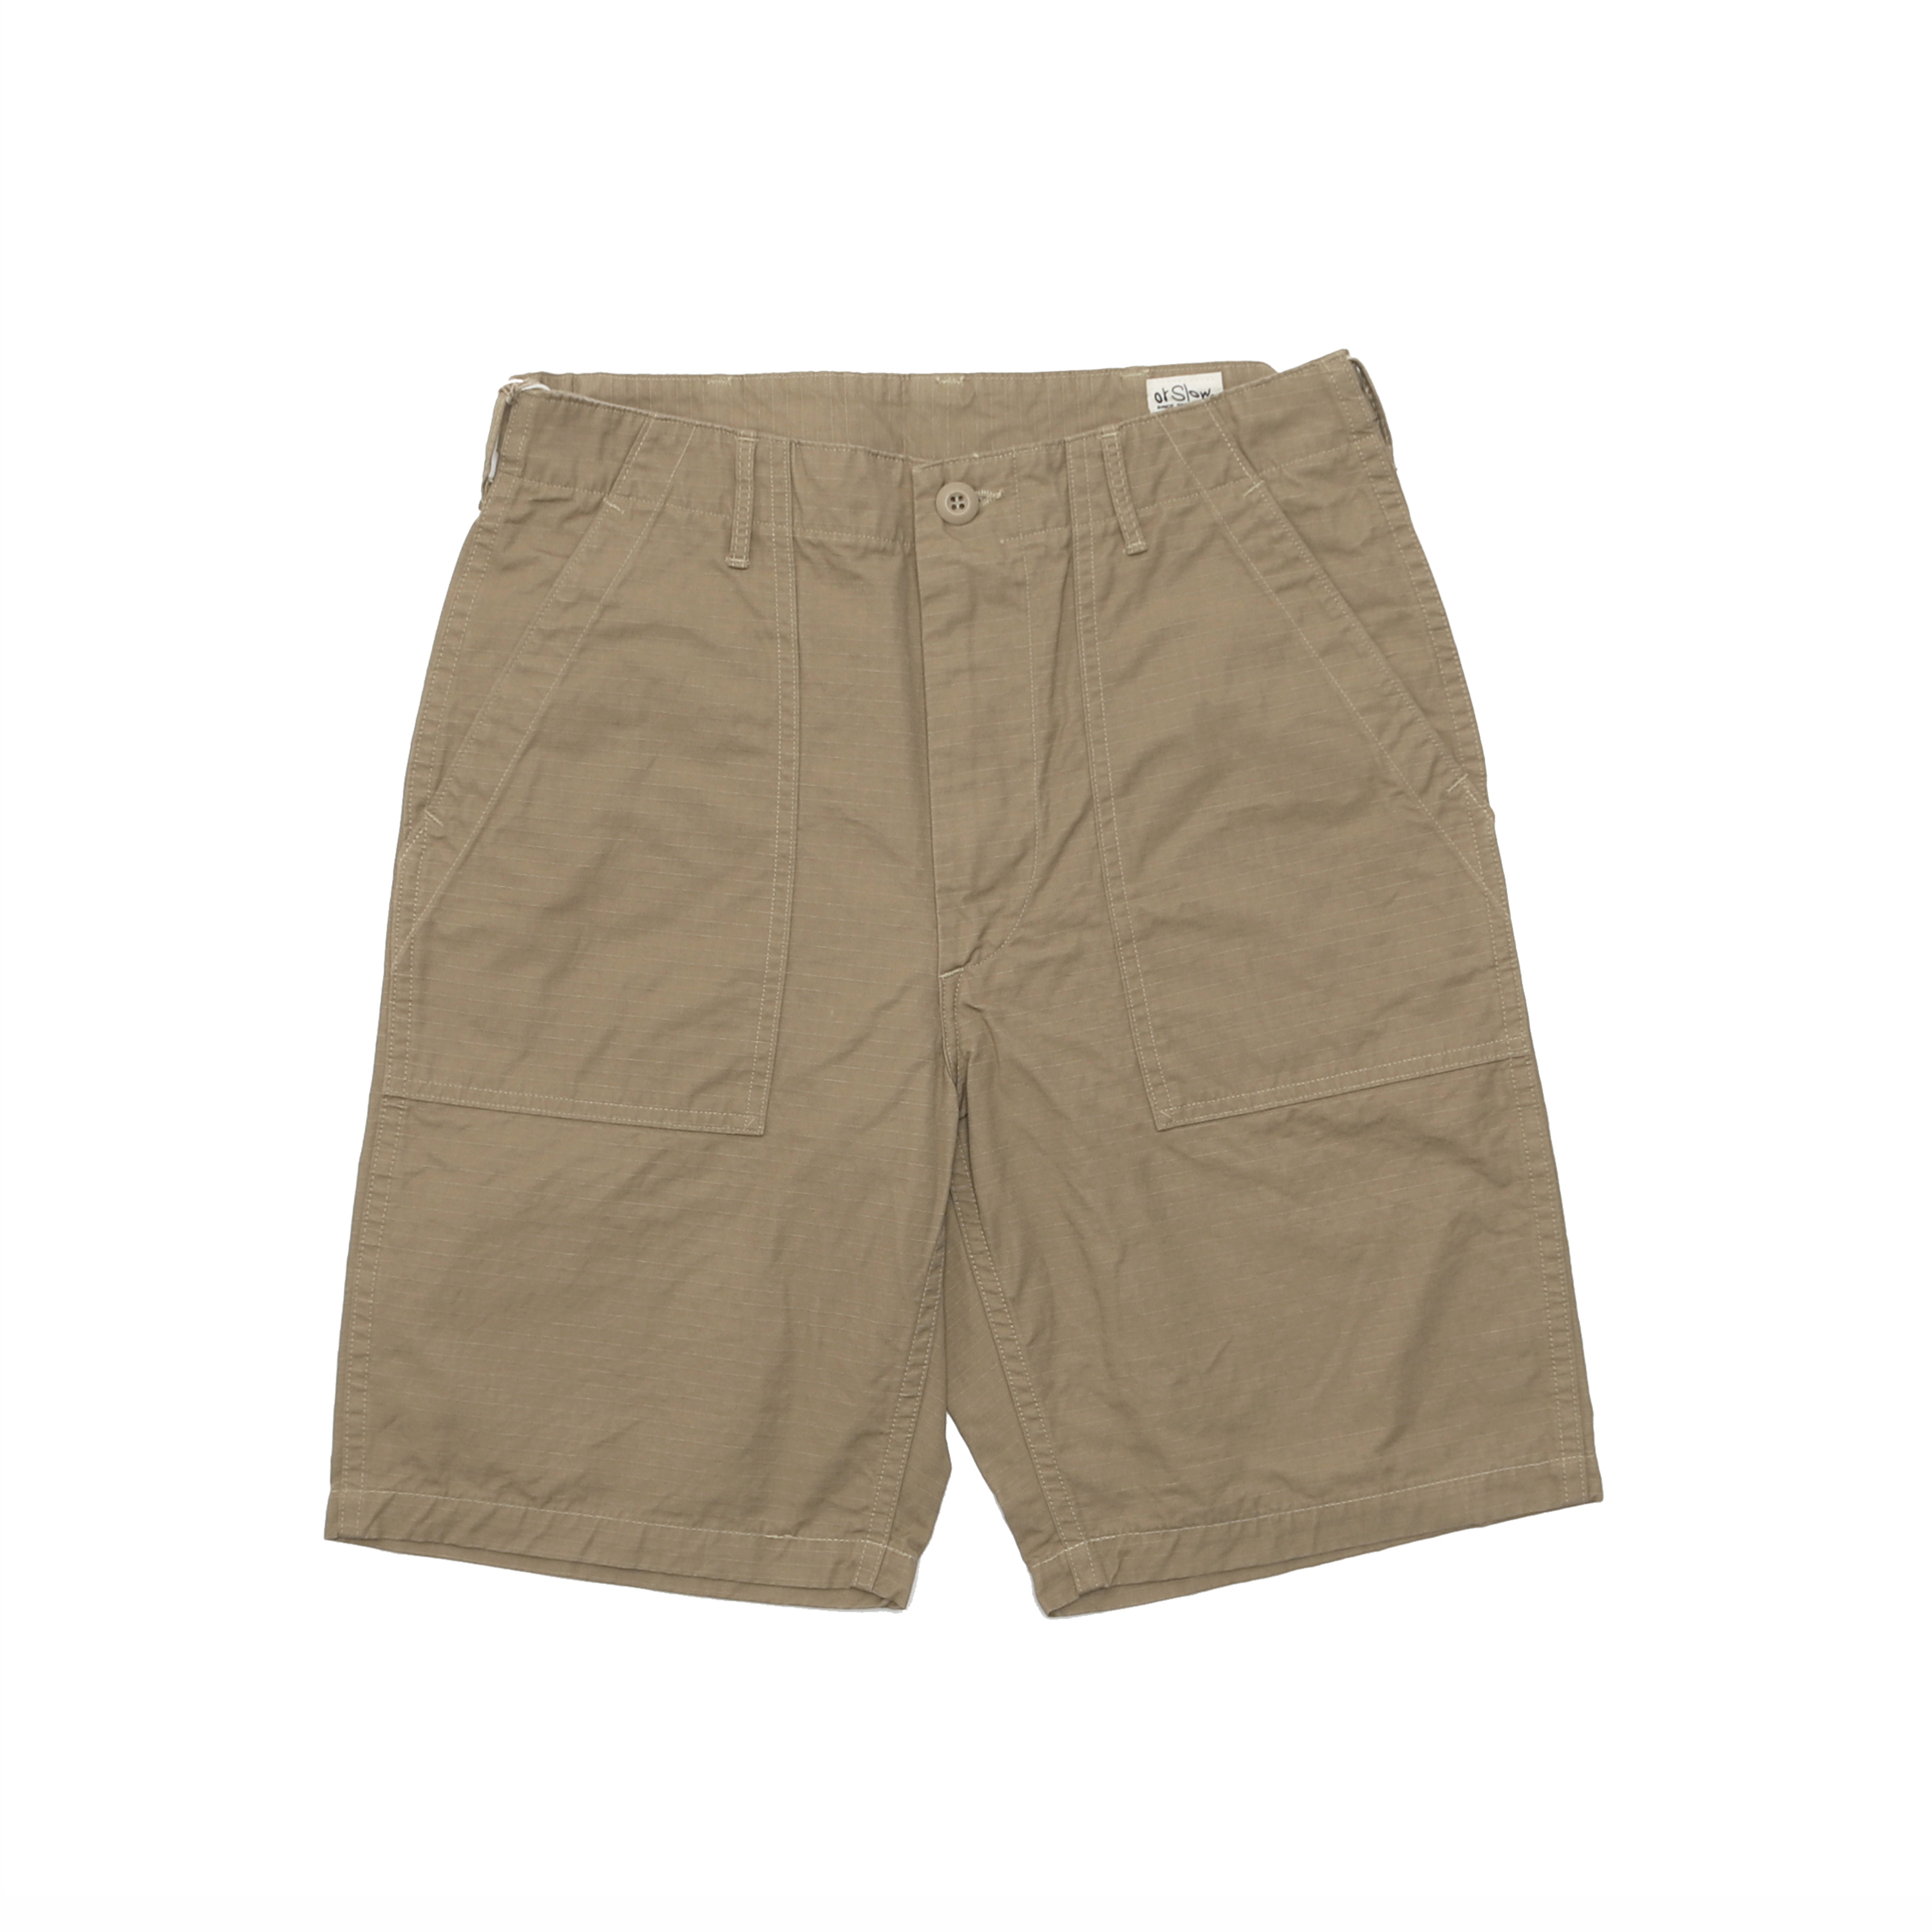 US ARMY FATIGUE SHORTS - BEIGE RIPSTOP